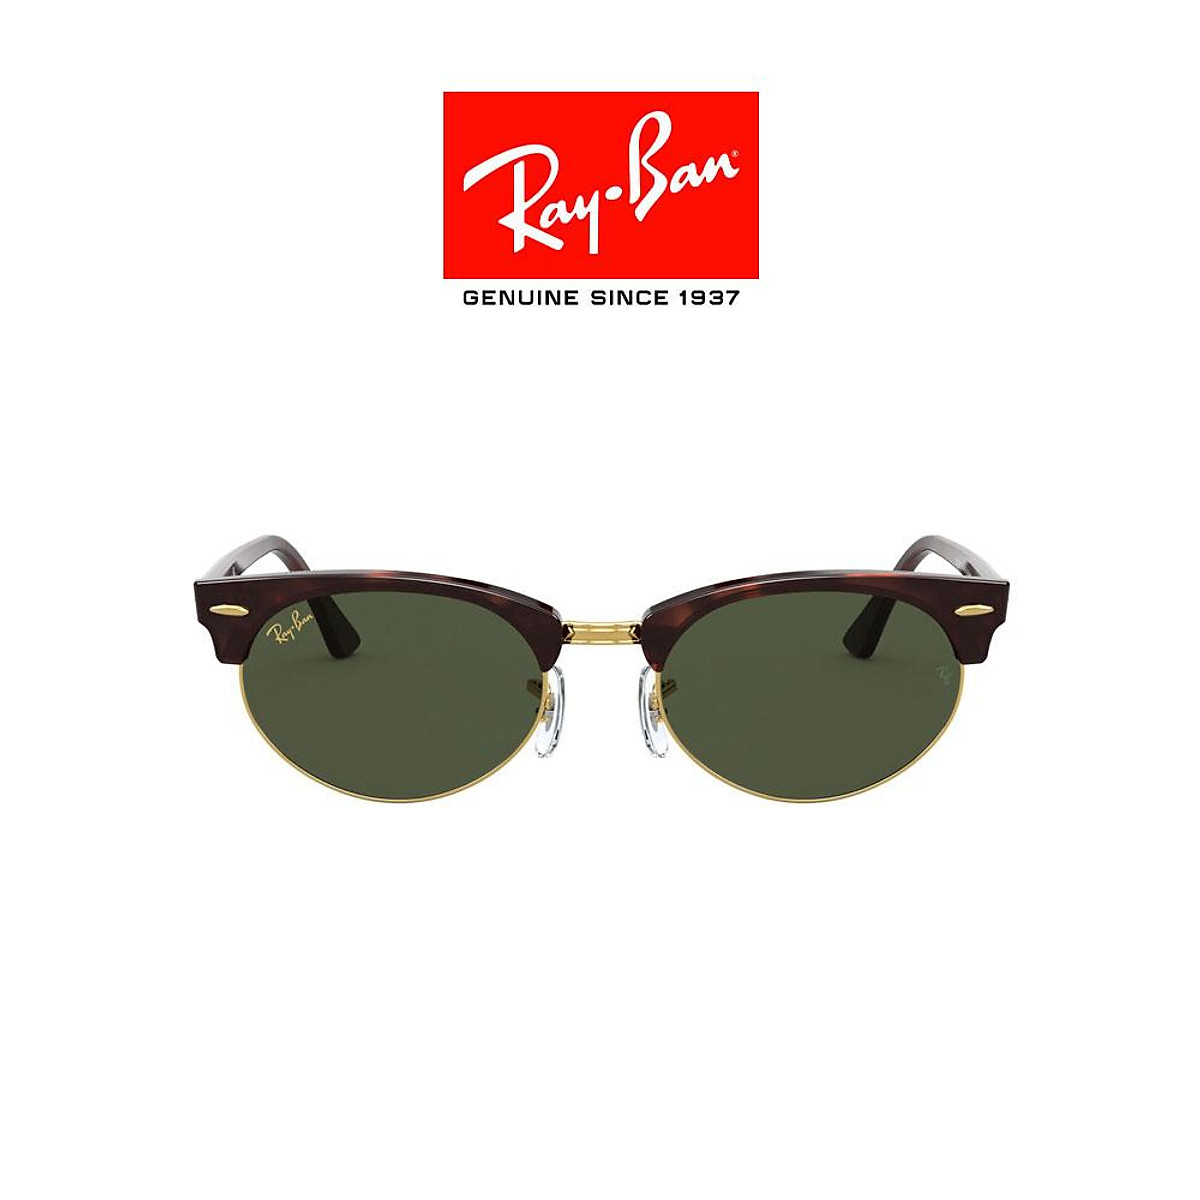 Mua Mắt Kính RAY-BAN CLUBMASTER OVAL - RB3946 130431 -Sunglasses tại Rayban  Official Store